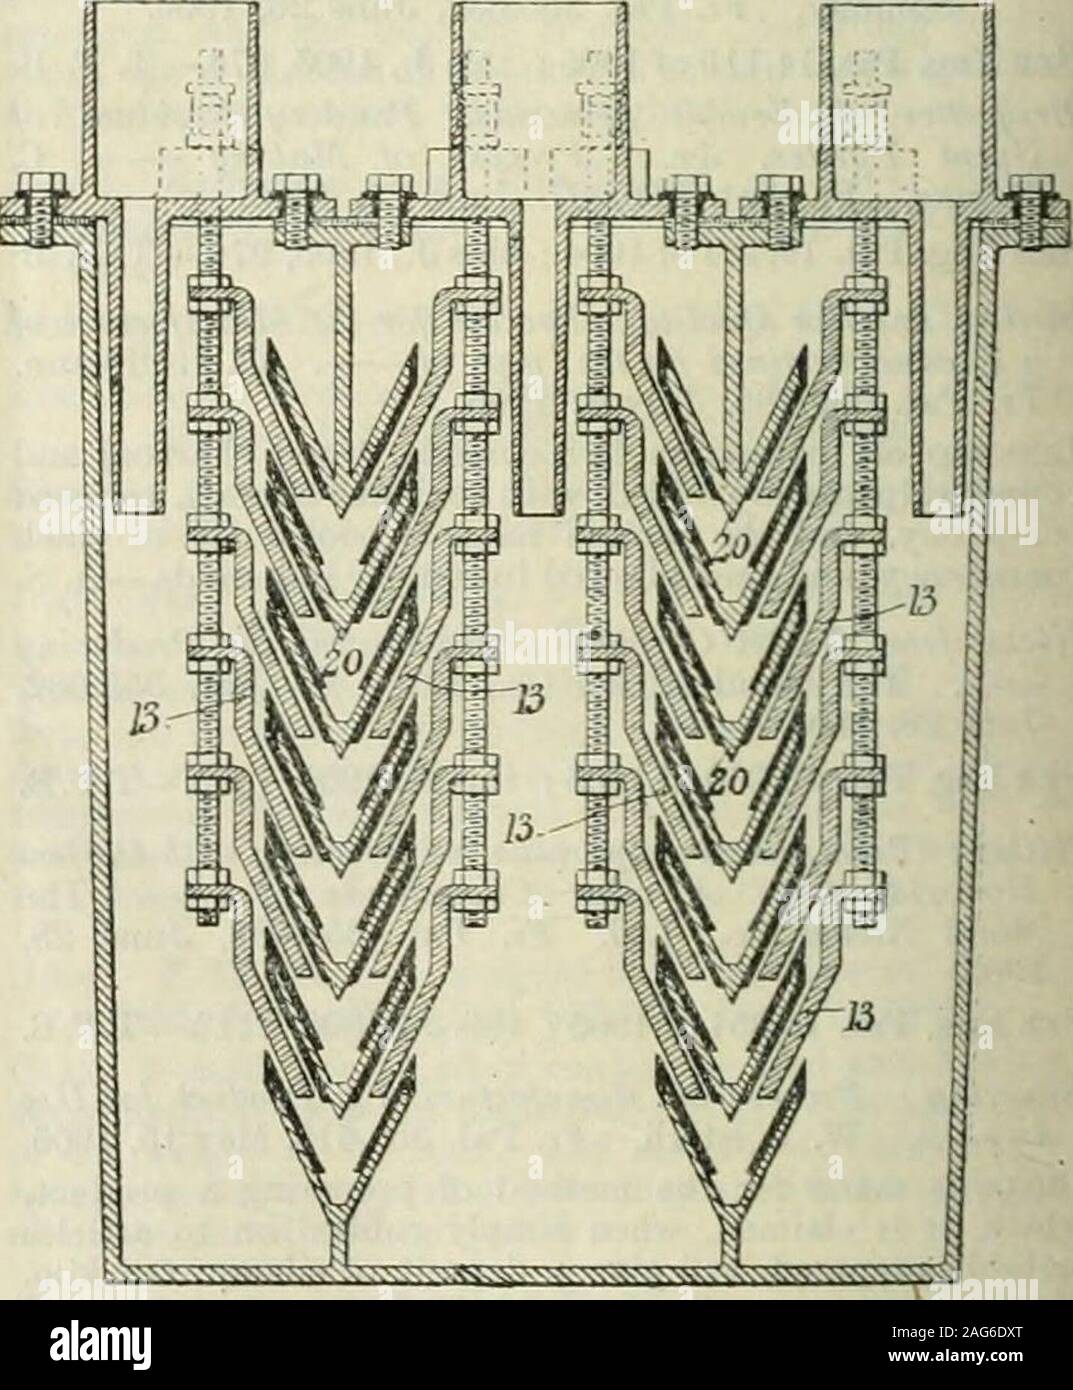 . Journal. lectrodes for Arc Lamps. E. Mendoza and R. Bueno.Fr. Pat. 350,186, Sept. 23, 1904. II., page 1220. Filaments for Incandescejil [Electric] Lamps. A. Justand F. Hanaman. Addition, dated June 10, 1905, toFr. Pat. 347,661, Nov. 4, 1901. II., page 1220. Accumulator [Plates; Regenerating 1. I. Kitsee. Fr. Pat. 355,839, July 3, 1905. See U.S. Pat. 793,881 of 1905 ; this J., 1905, 850.—T. F. B. Electric Insulating Material and its Method of Prepara-tion. V. E. Boitelet and F. Spigel. Fr. Pat. 356,028,July 10, 1905.Crude animal or vegetable products which are bad con-ductors of heat and elec Stock Photo